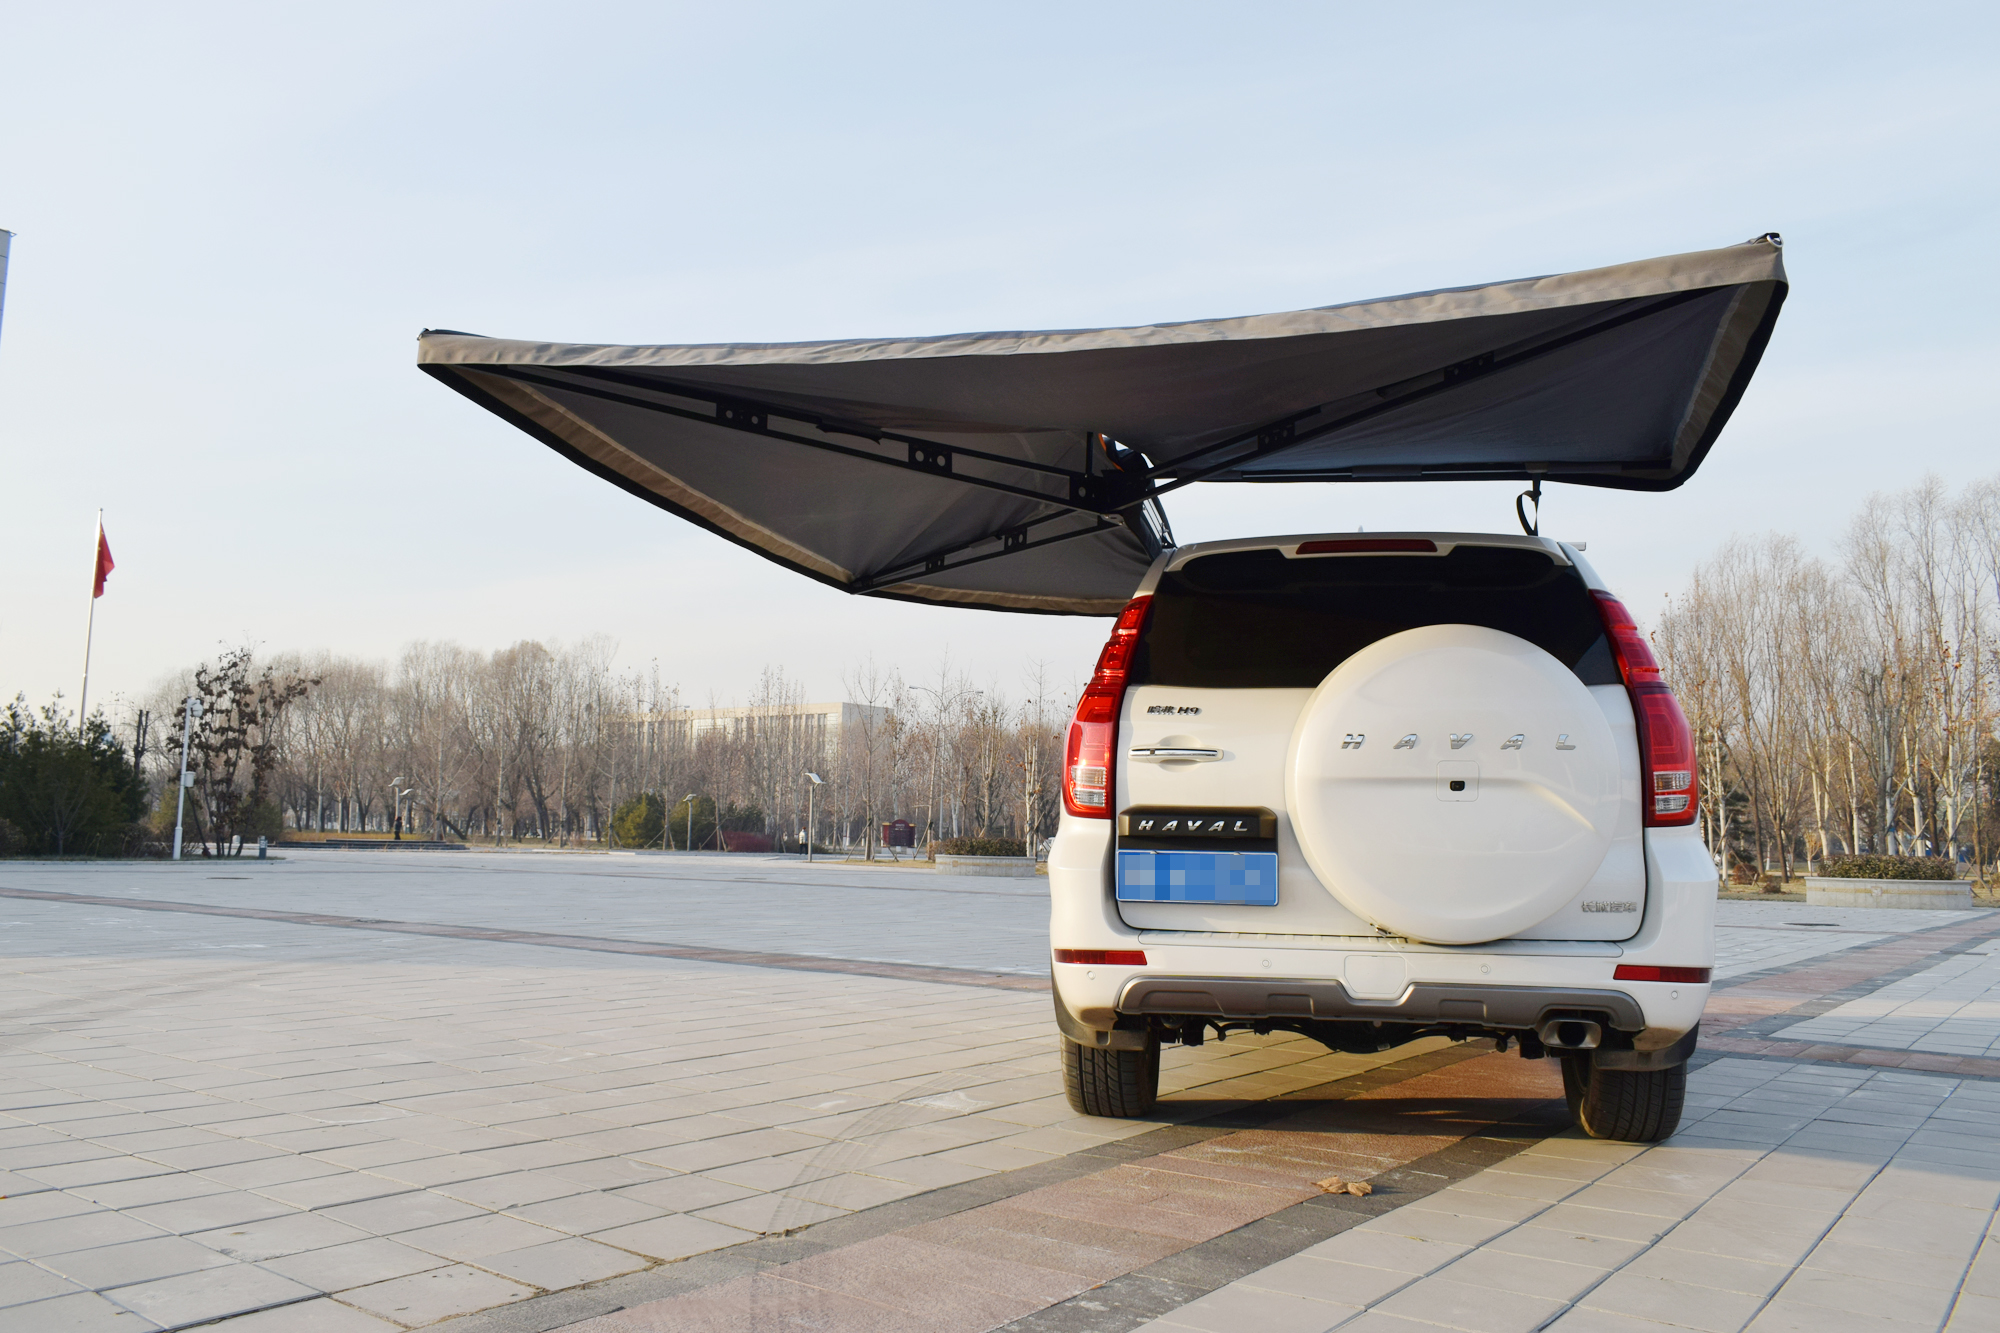 Which Type Of Vehicle Awning Is Compatible With Your Vehicle?